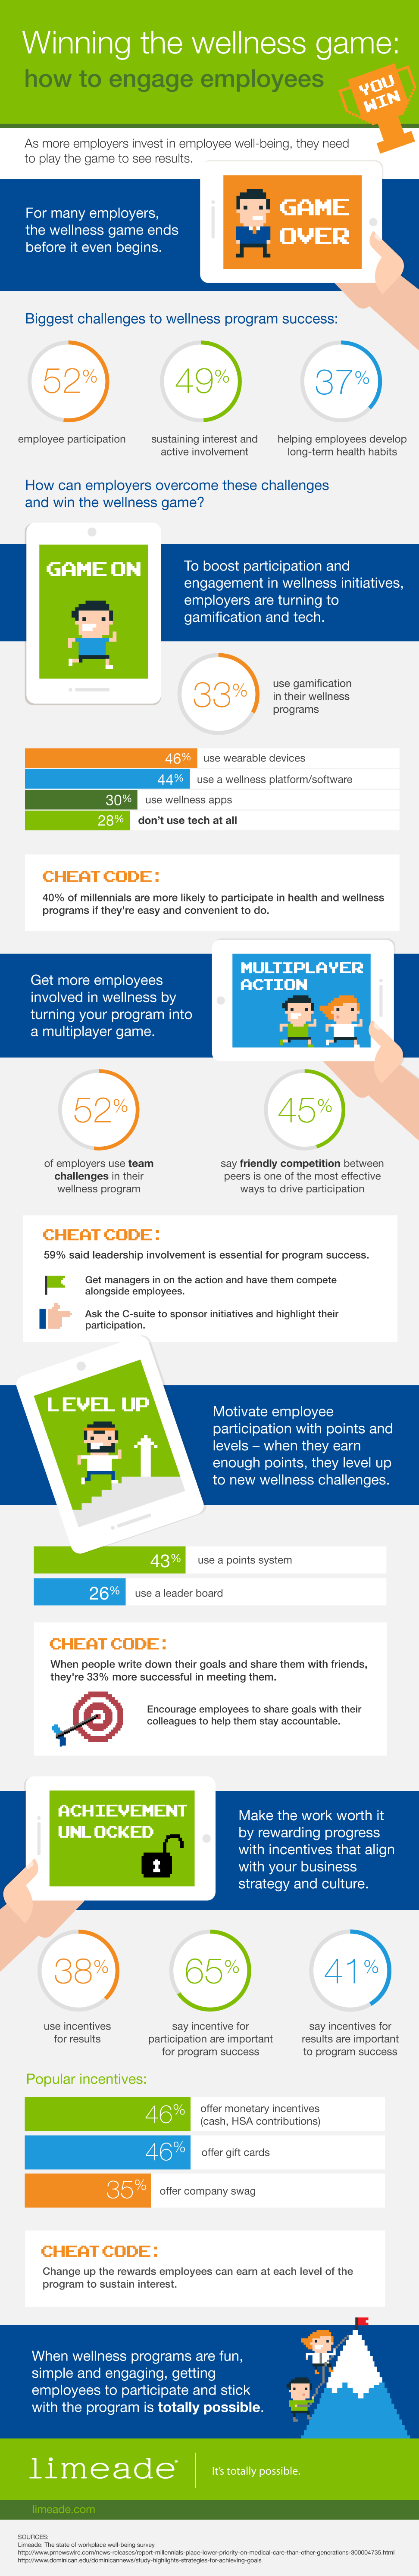 limeade-wellness-game-how-to-engage-employees-972px